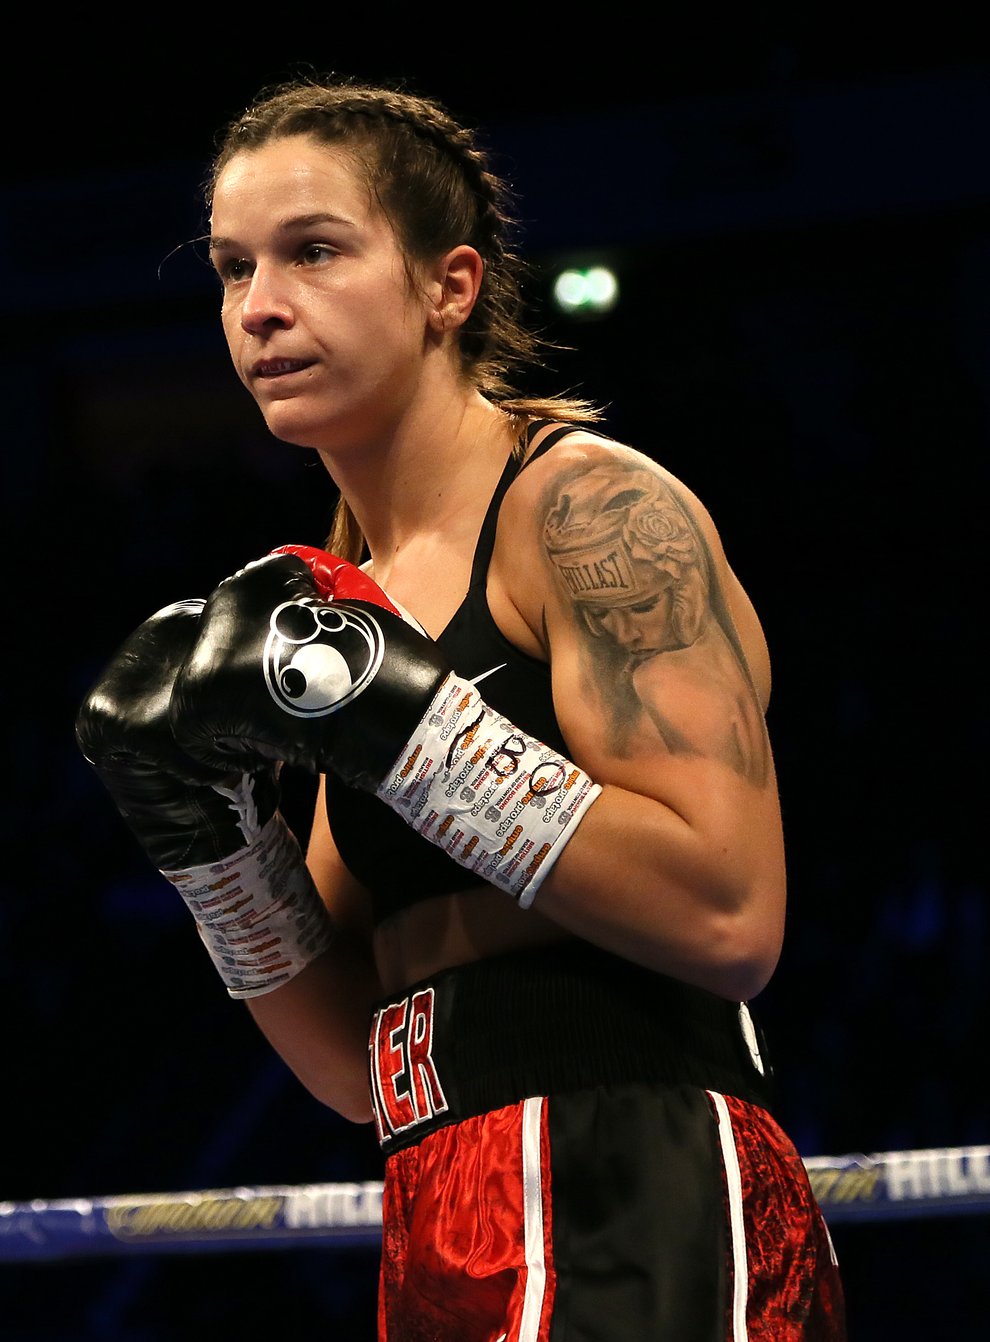 Terri Harper was scheduled to fight Natasha Jonas in a homecoming fight in Doncaster on April 24 (PA Images)